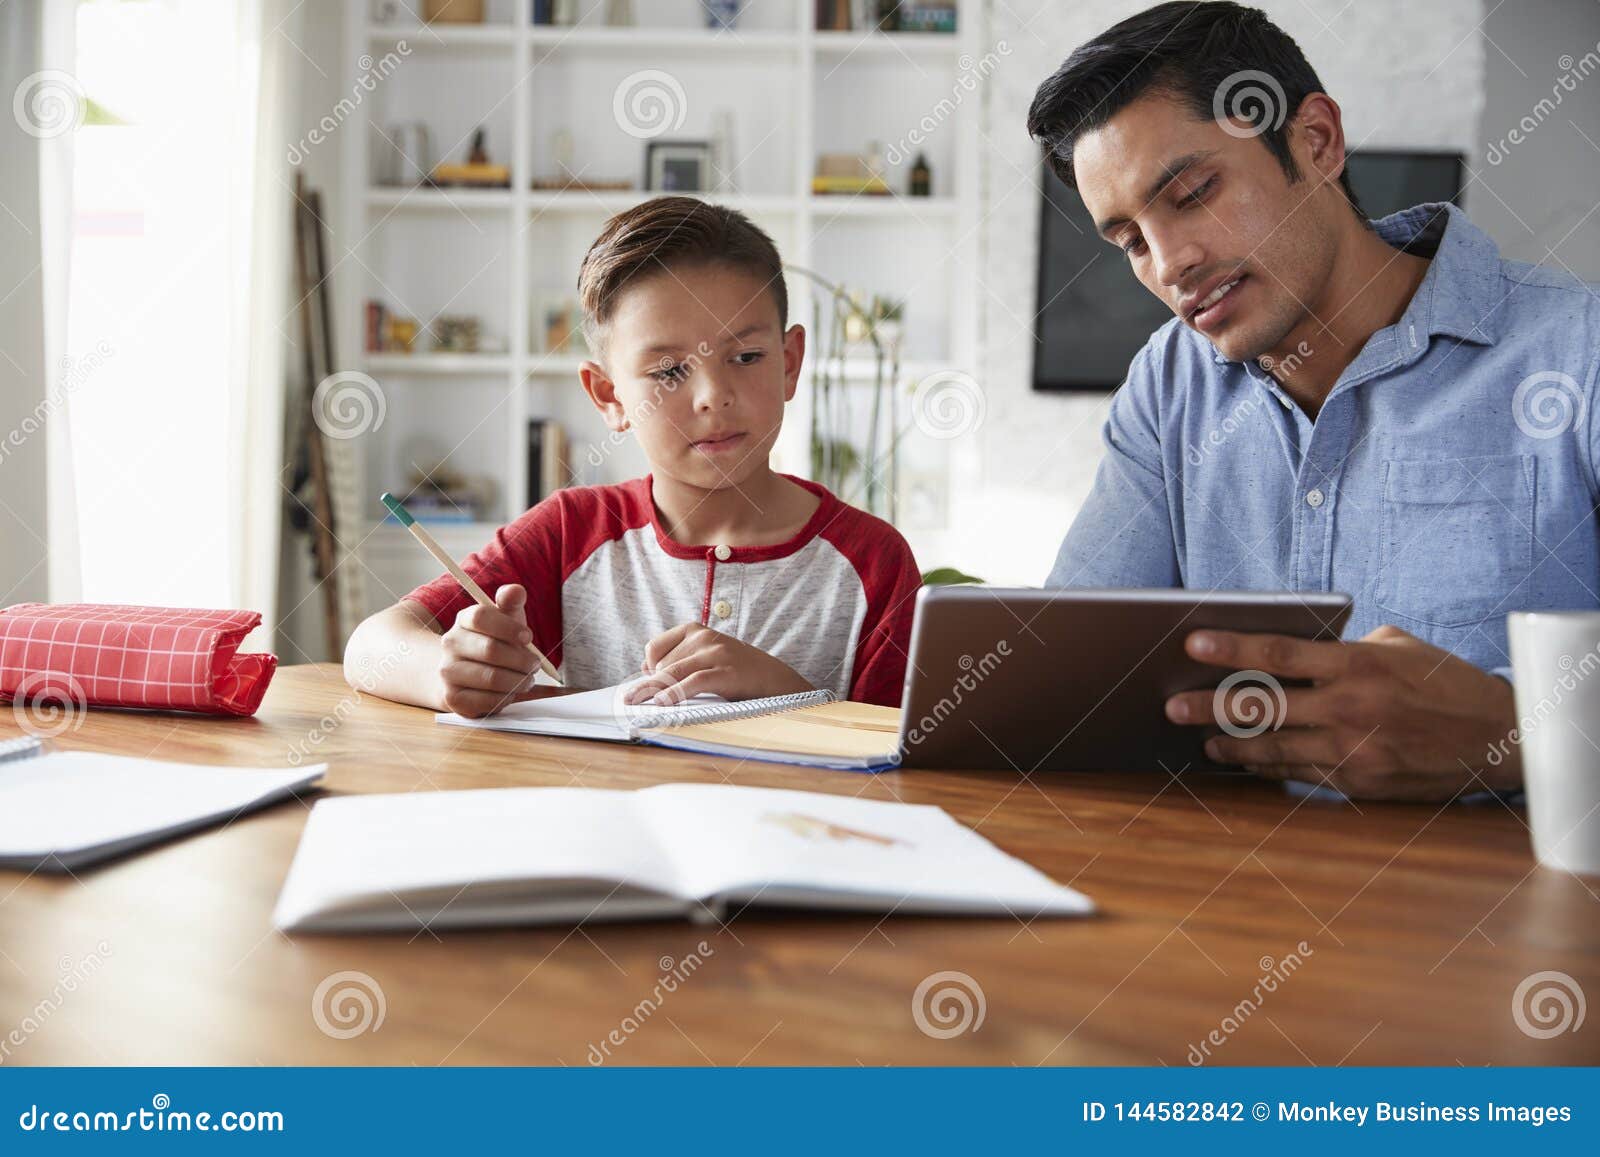 hispanic pre-teen boy sitting at table working with his home school tutor, using tablet computer